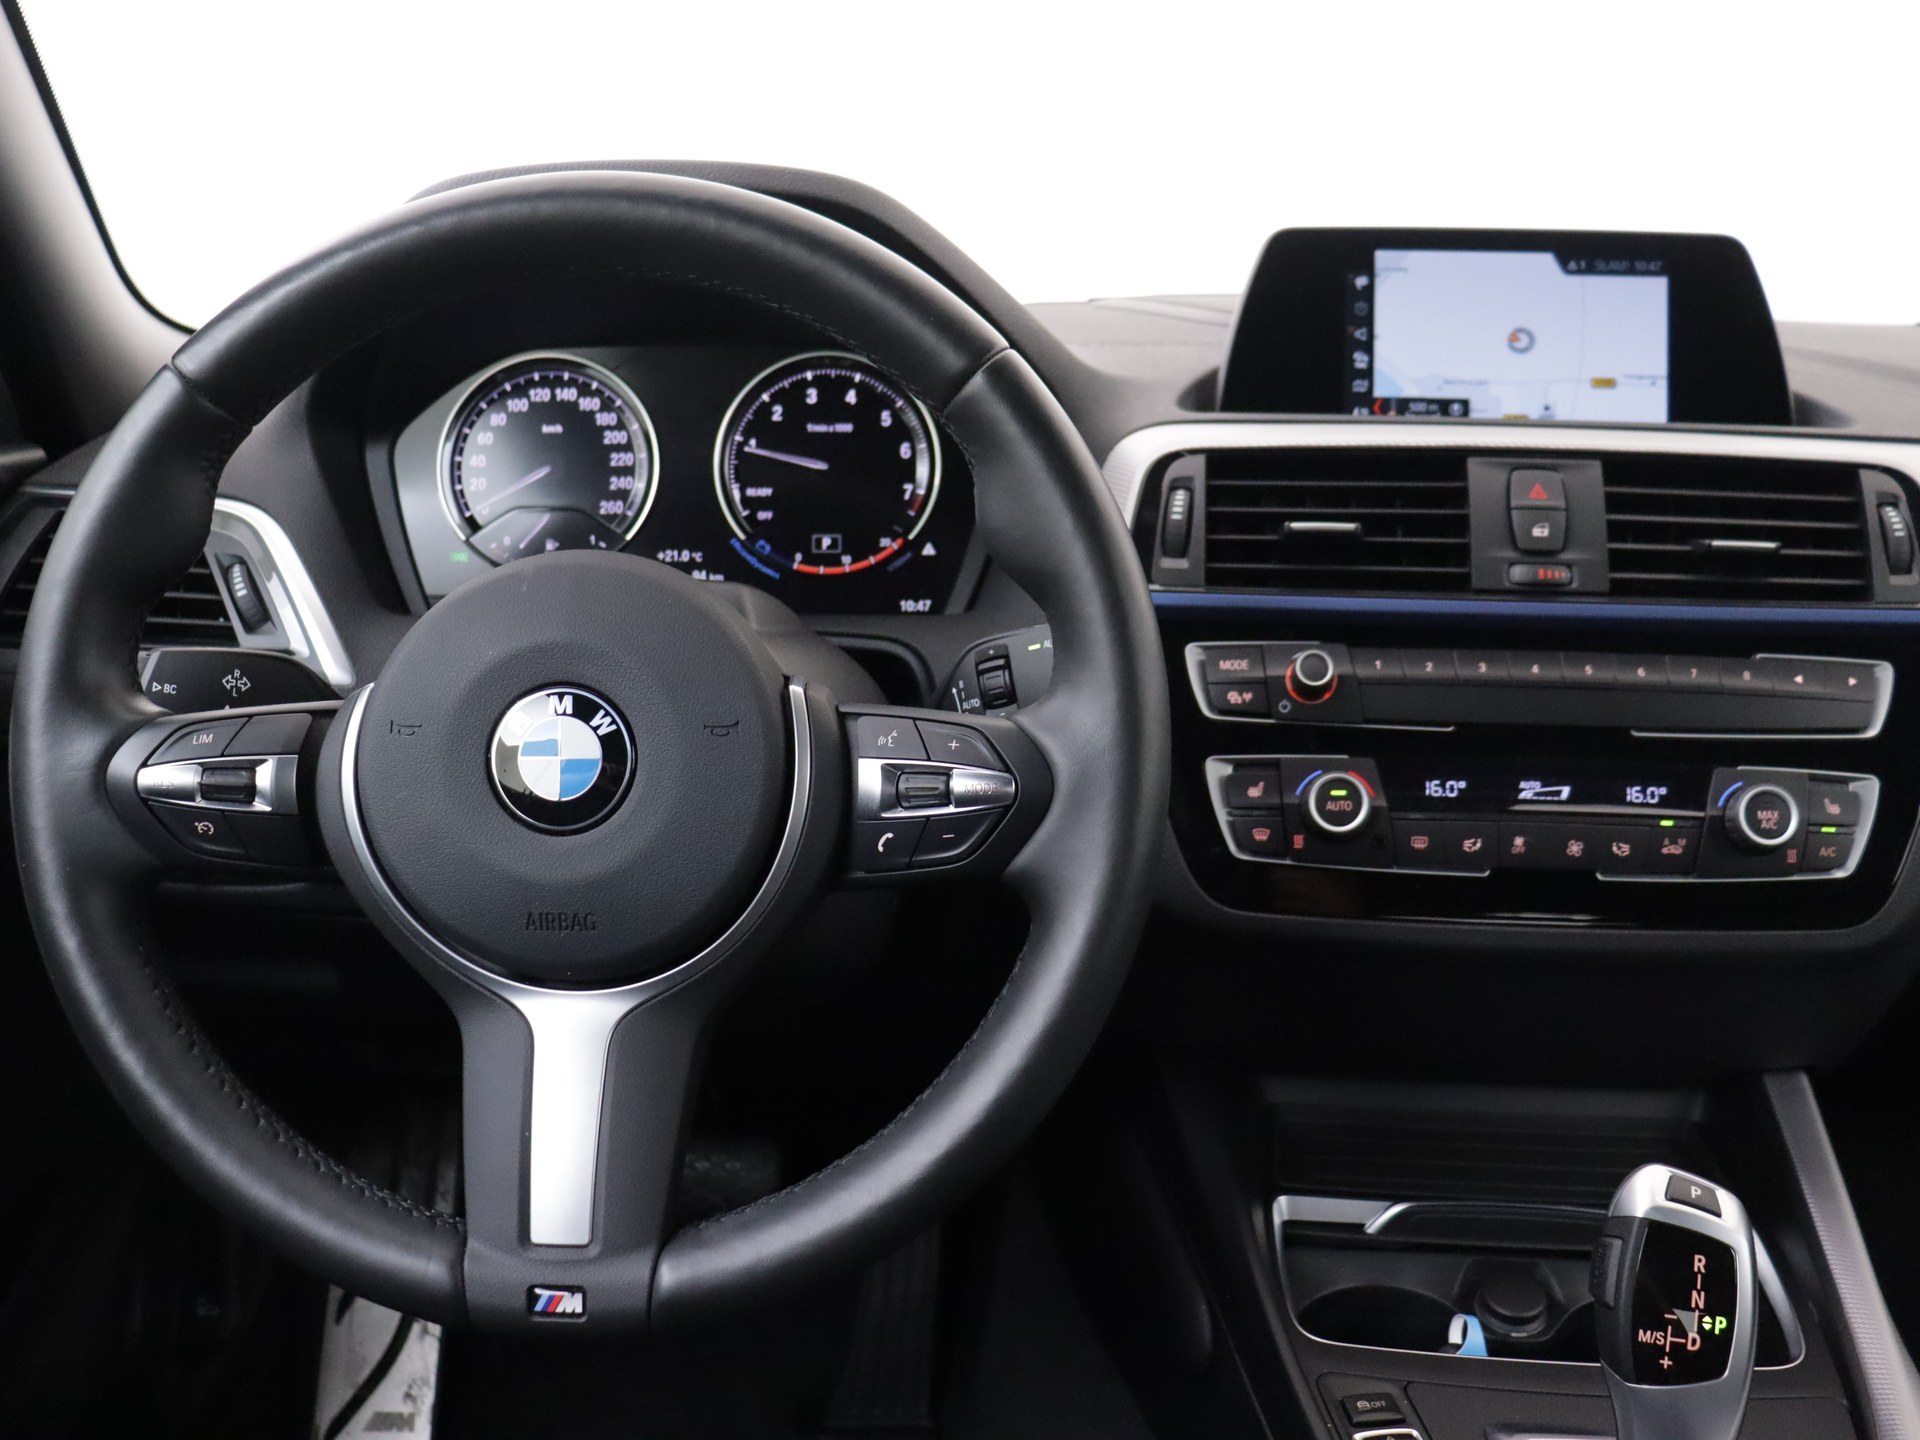 BMW 2 Serie Cabrio 218i High Executive van CarSelexy dealer RG Ulvenhout in Ulvenhout